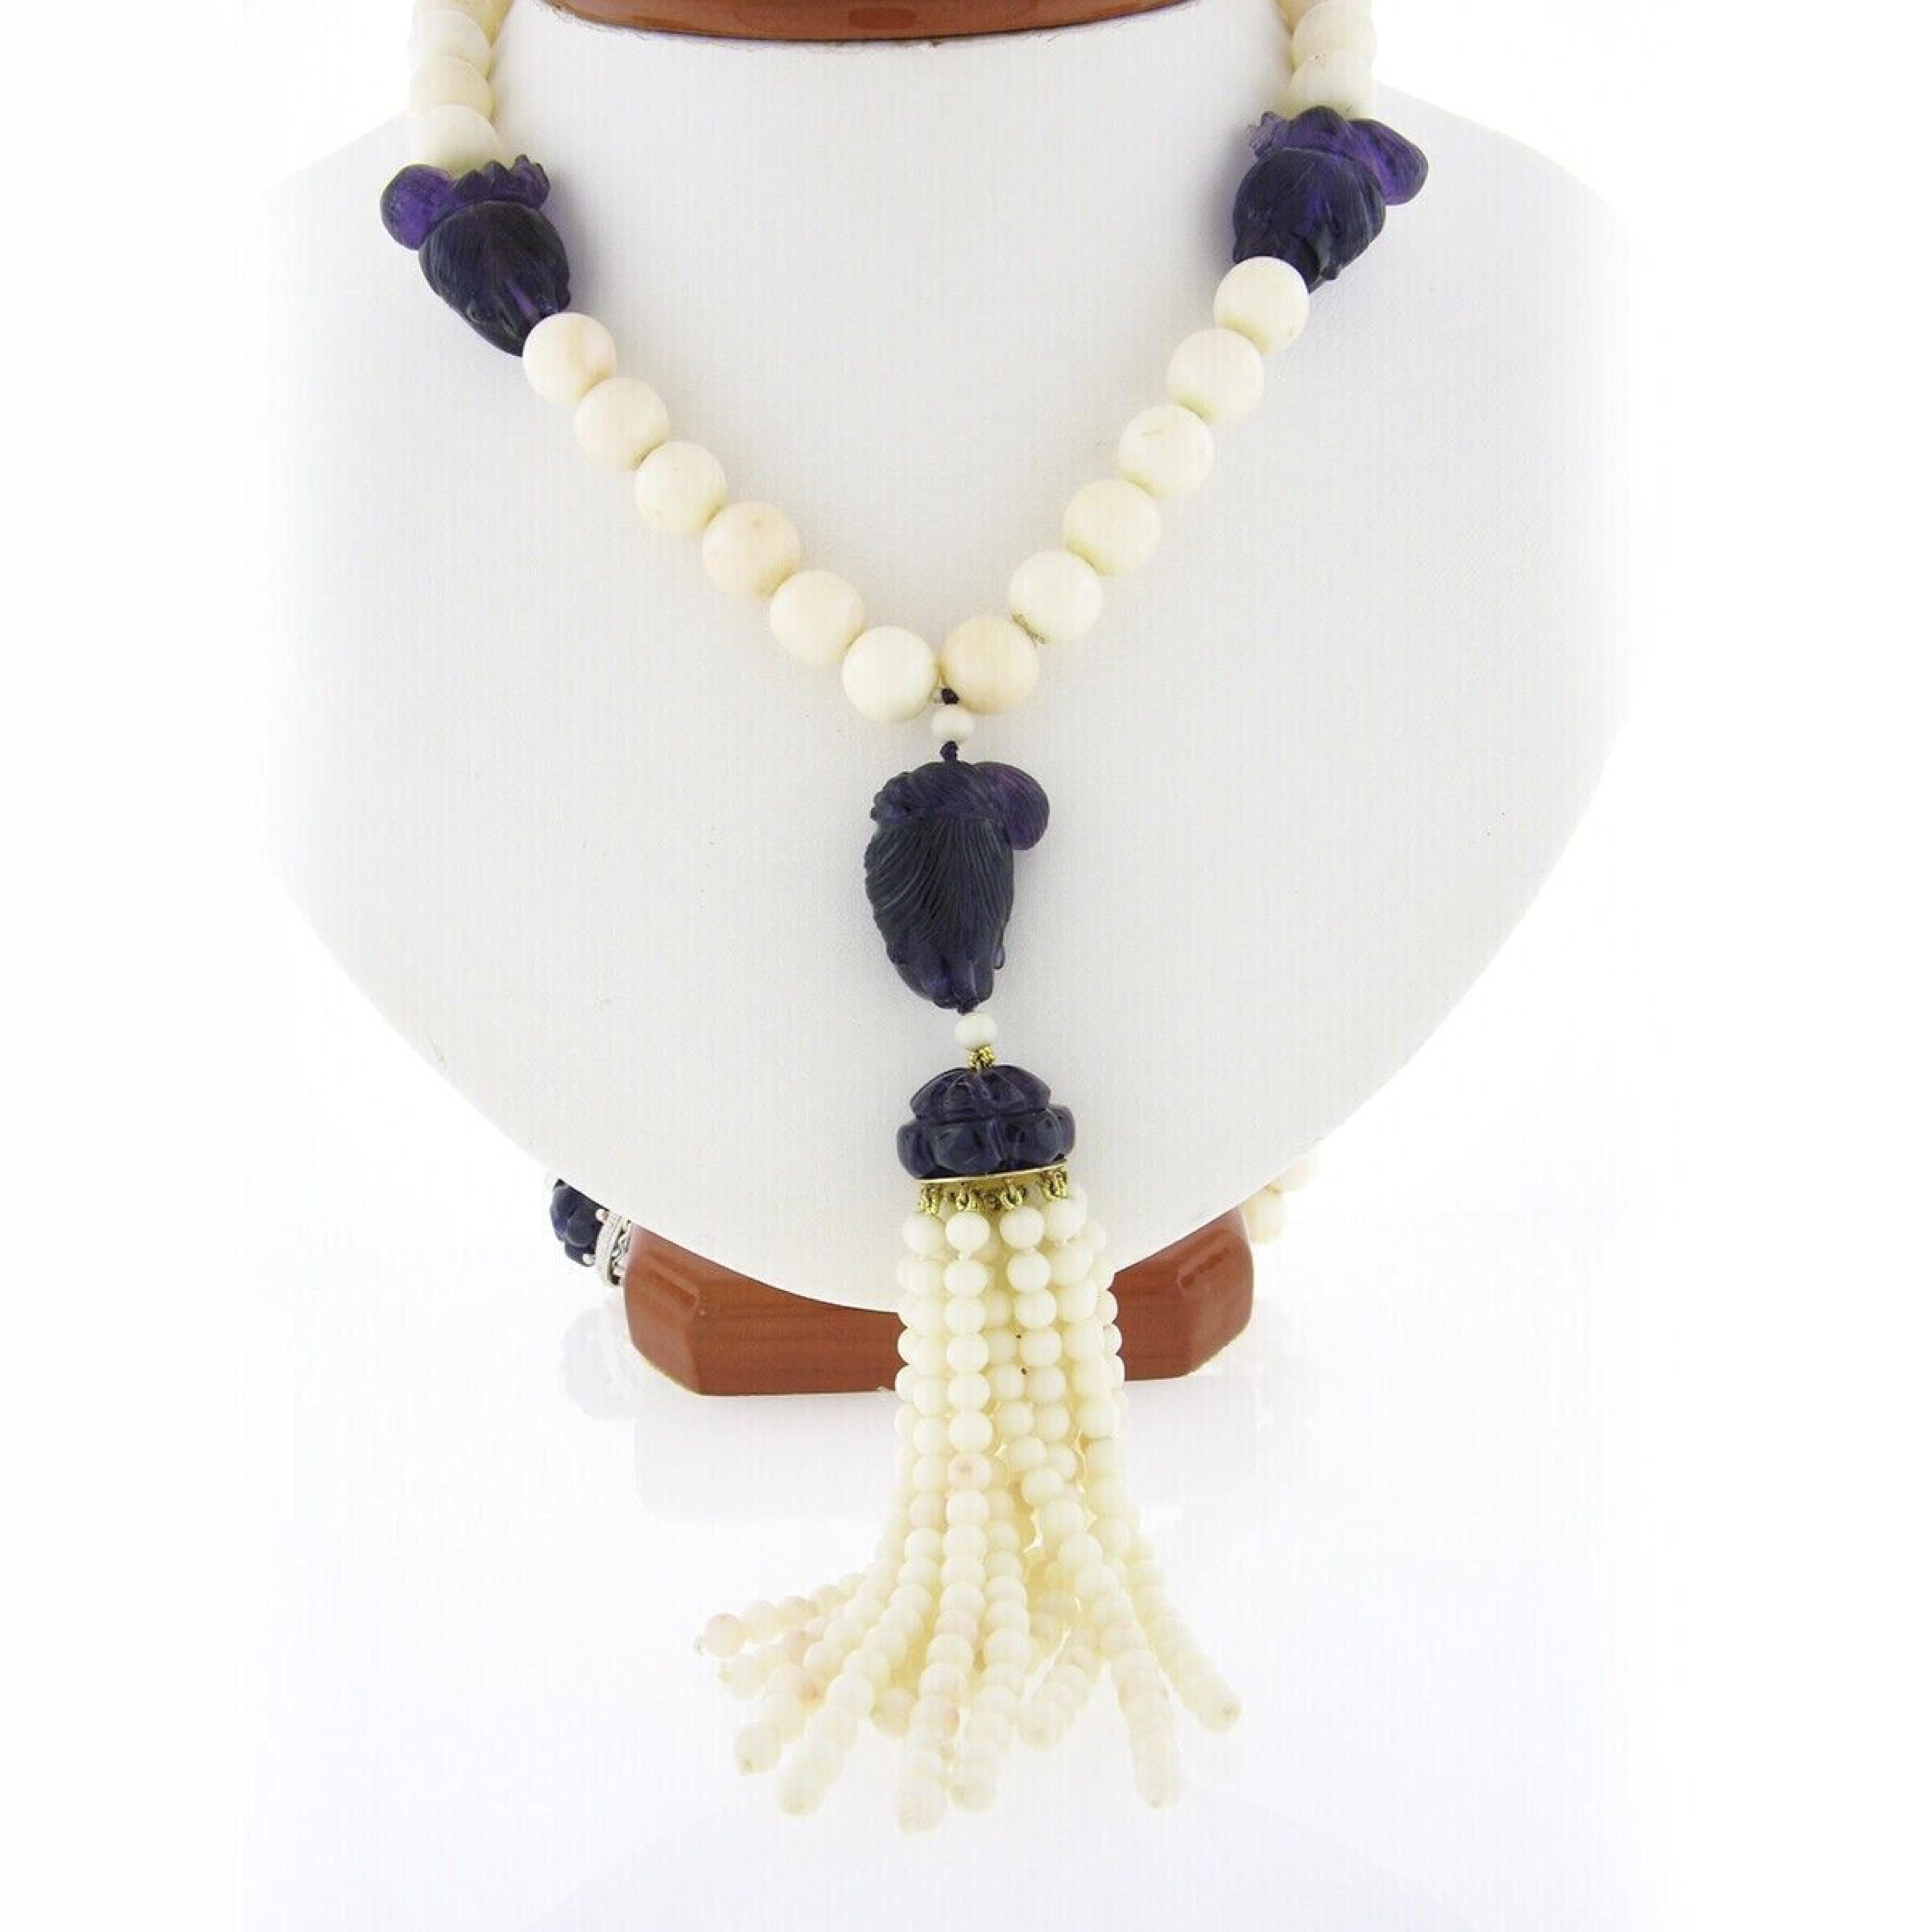 Here we have an absolutely magnificent, long, vintage angel skin coral bead strand necklace that features incredible carved amethyst stones neatly stationed throughout. Three round angel skin coral beads have been randomly selected and certified by